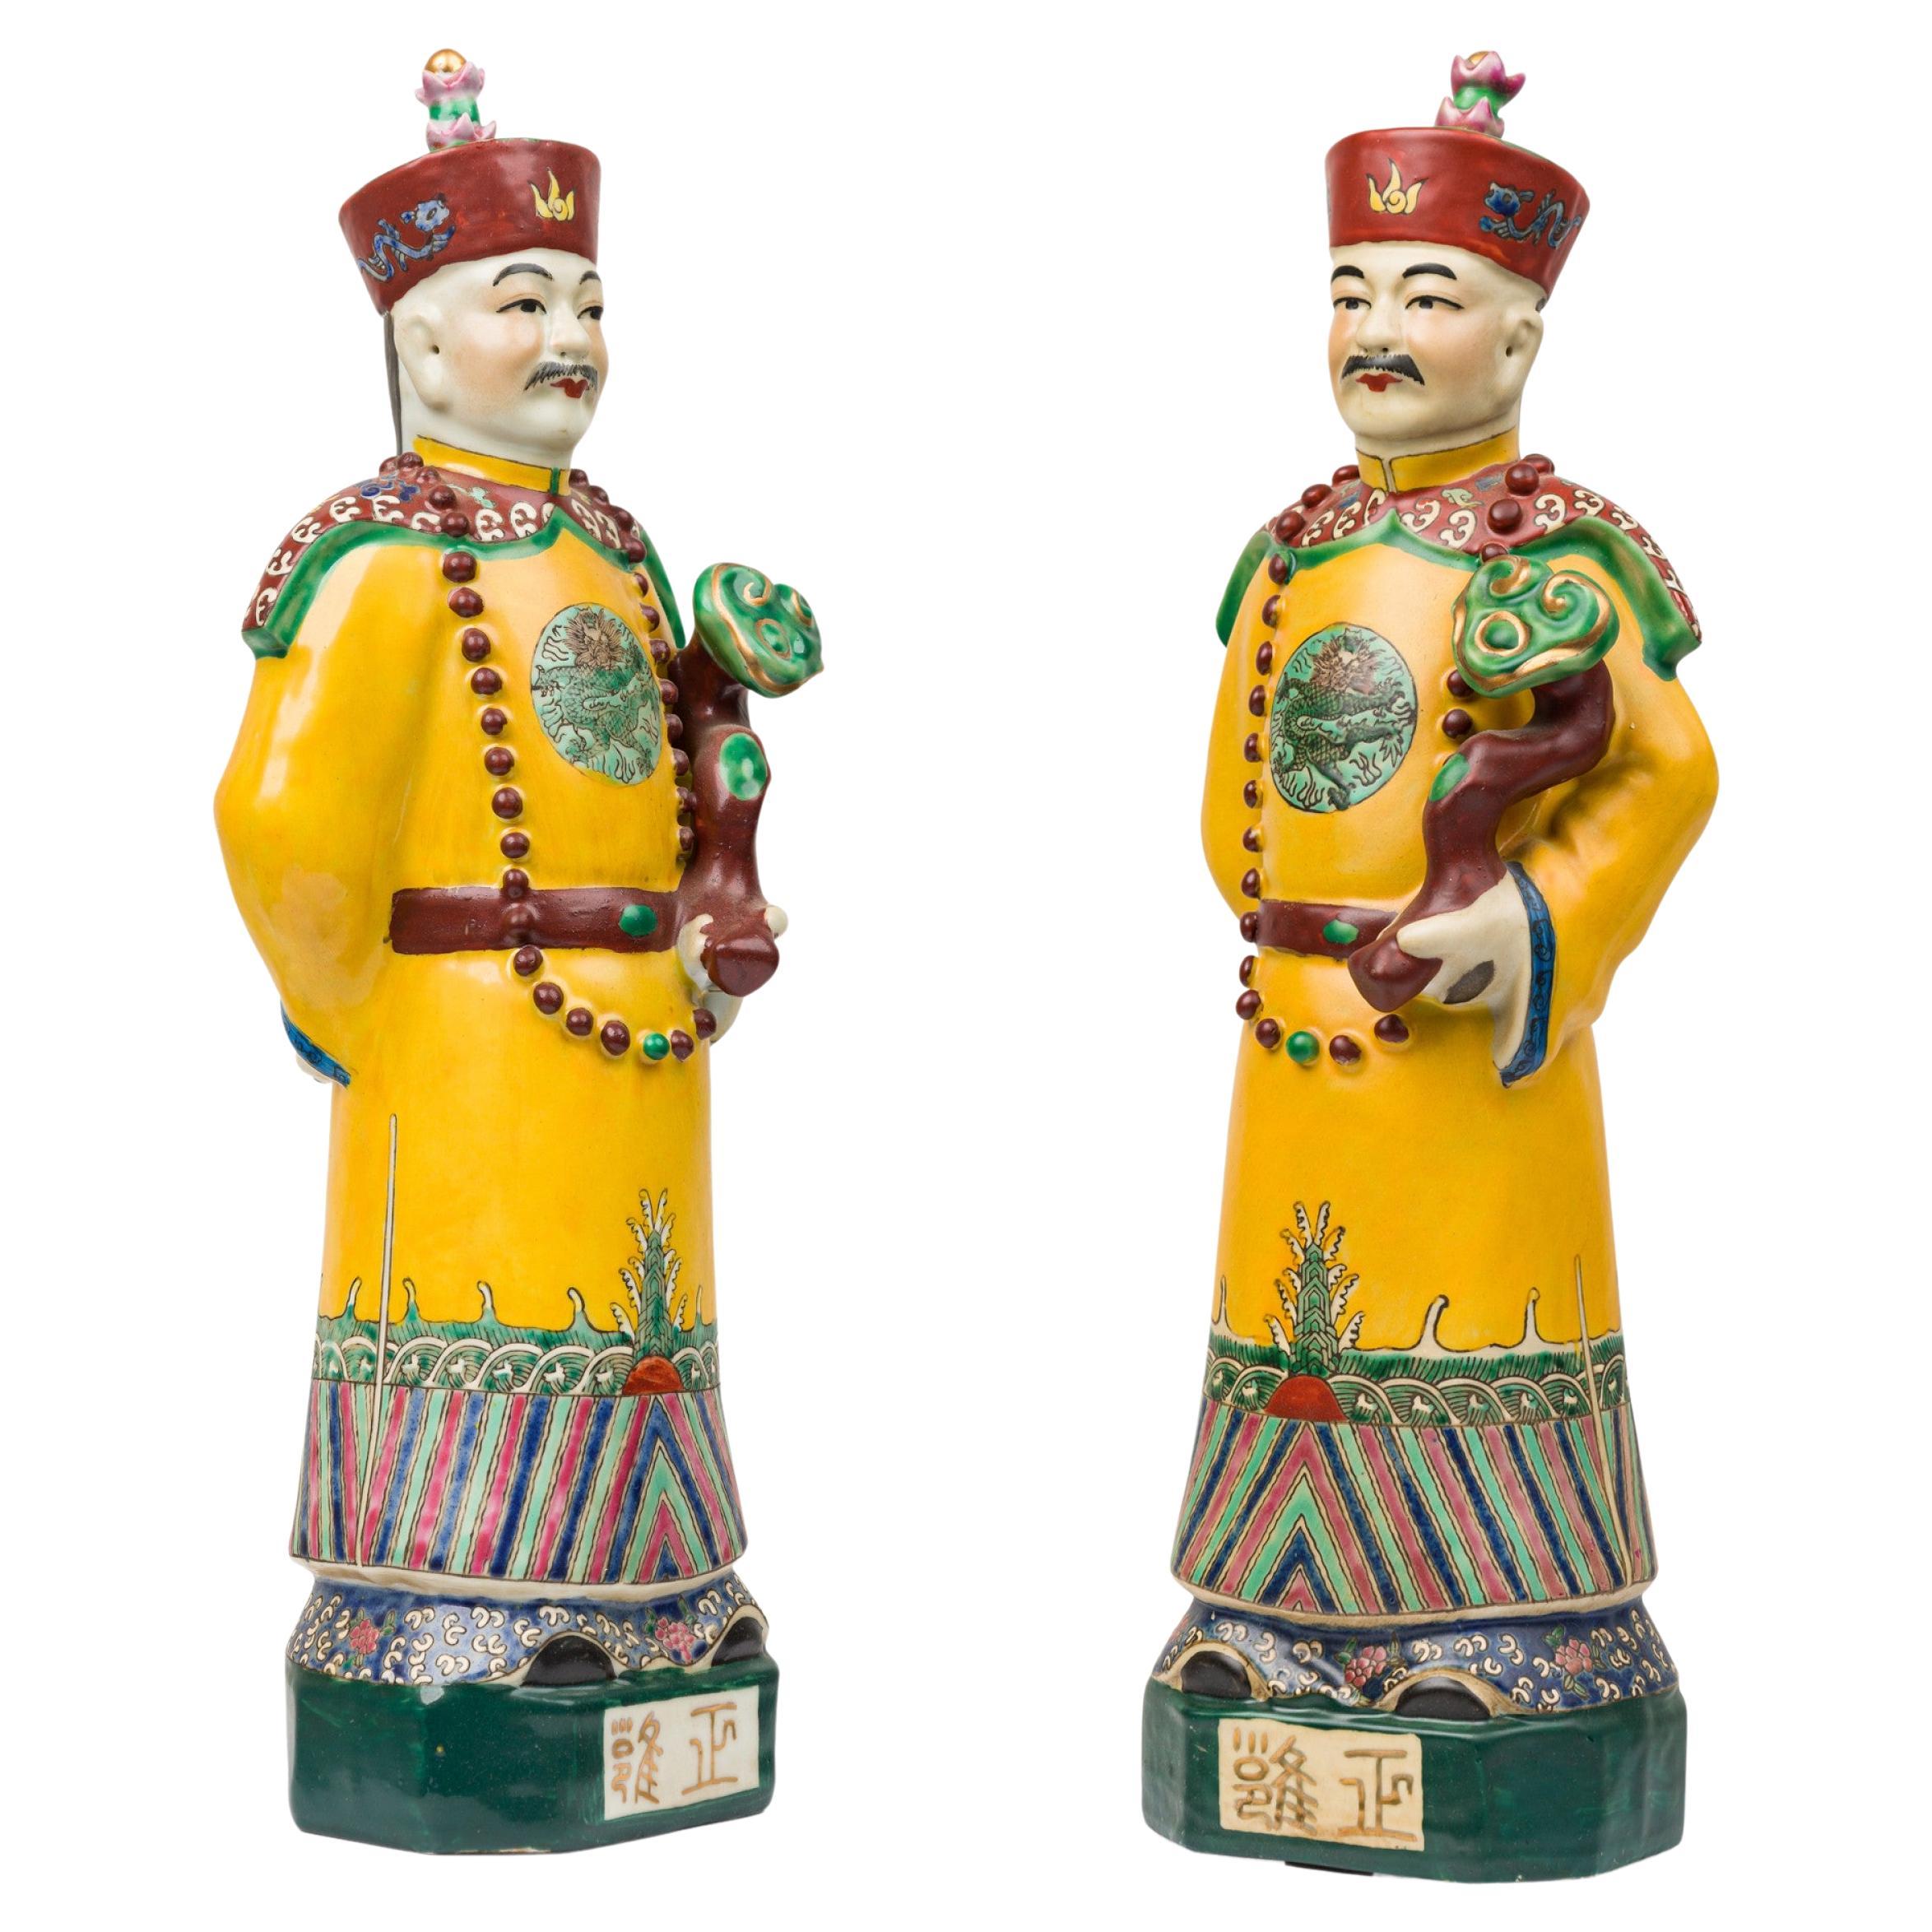 Pair of Chinese Painted Ceramic Figures Depicting a Yellow Robed Emperor